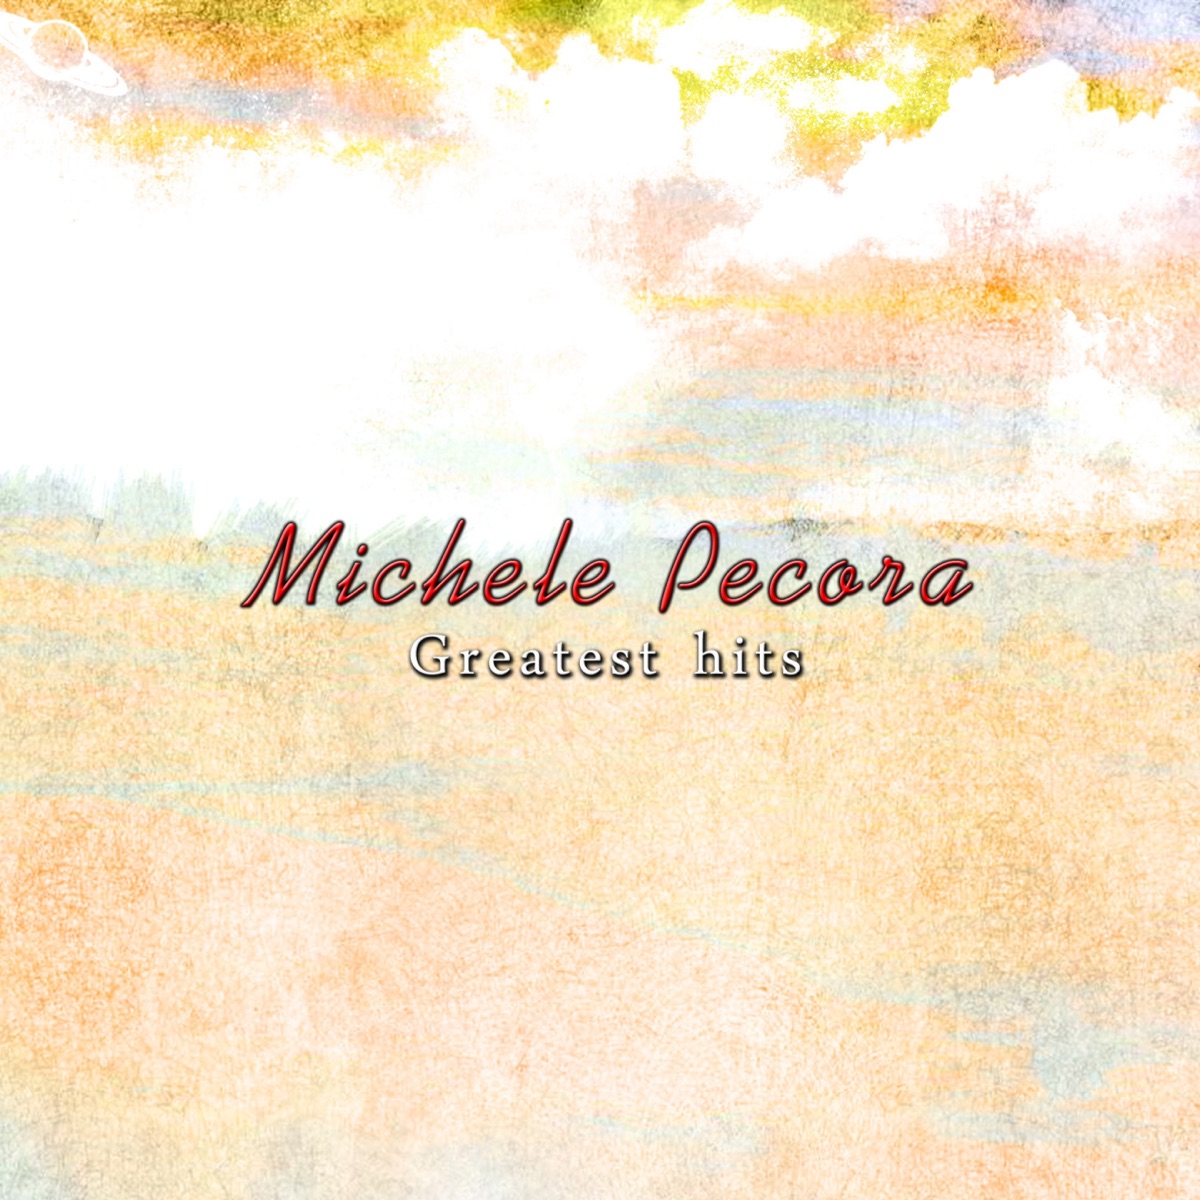 Greatest Hits by Michele Pecora on Apple Music